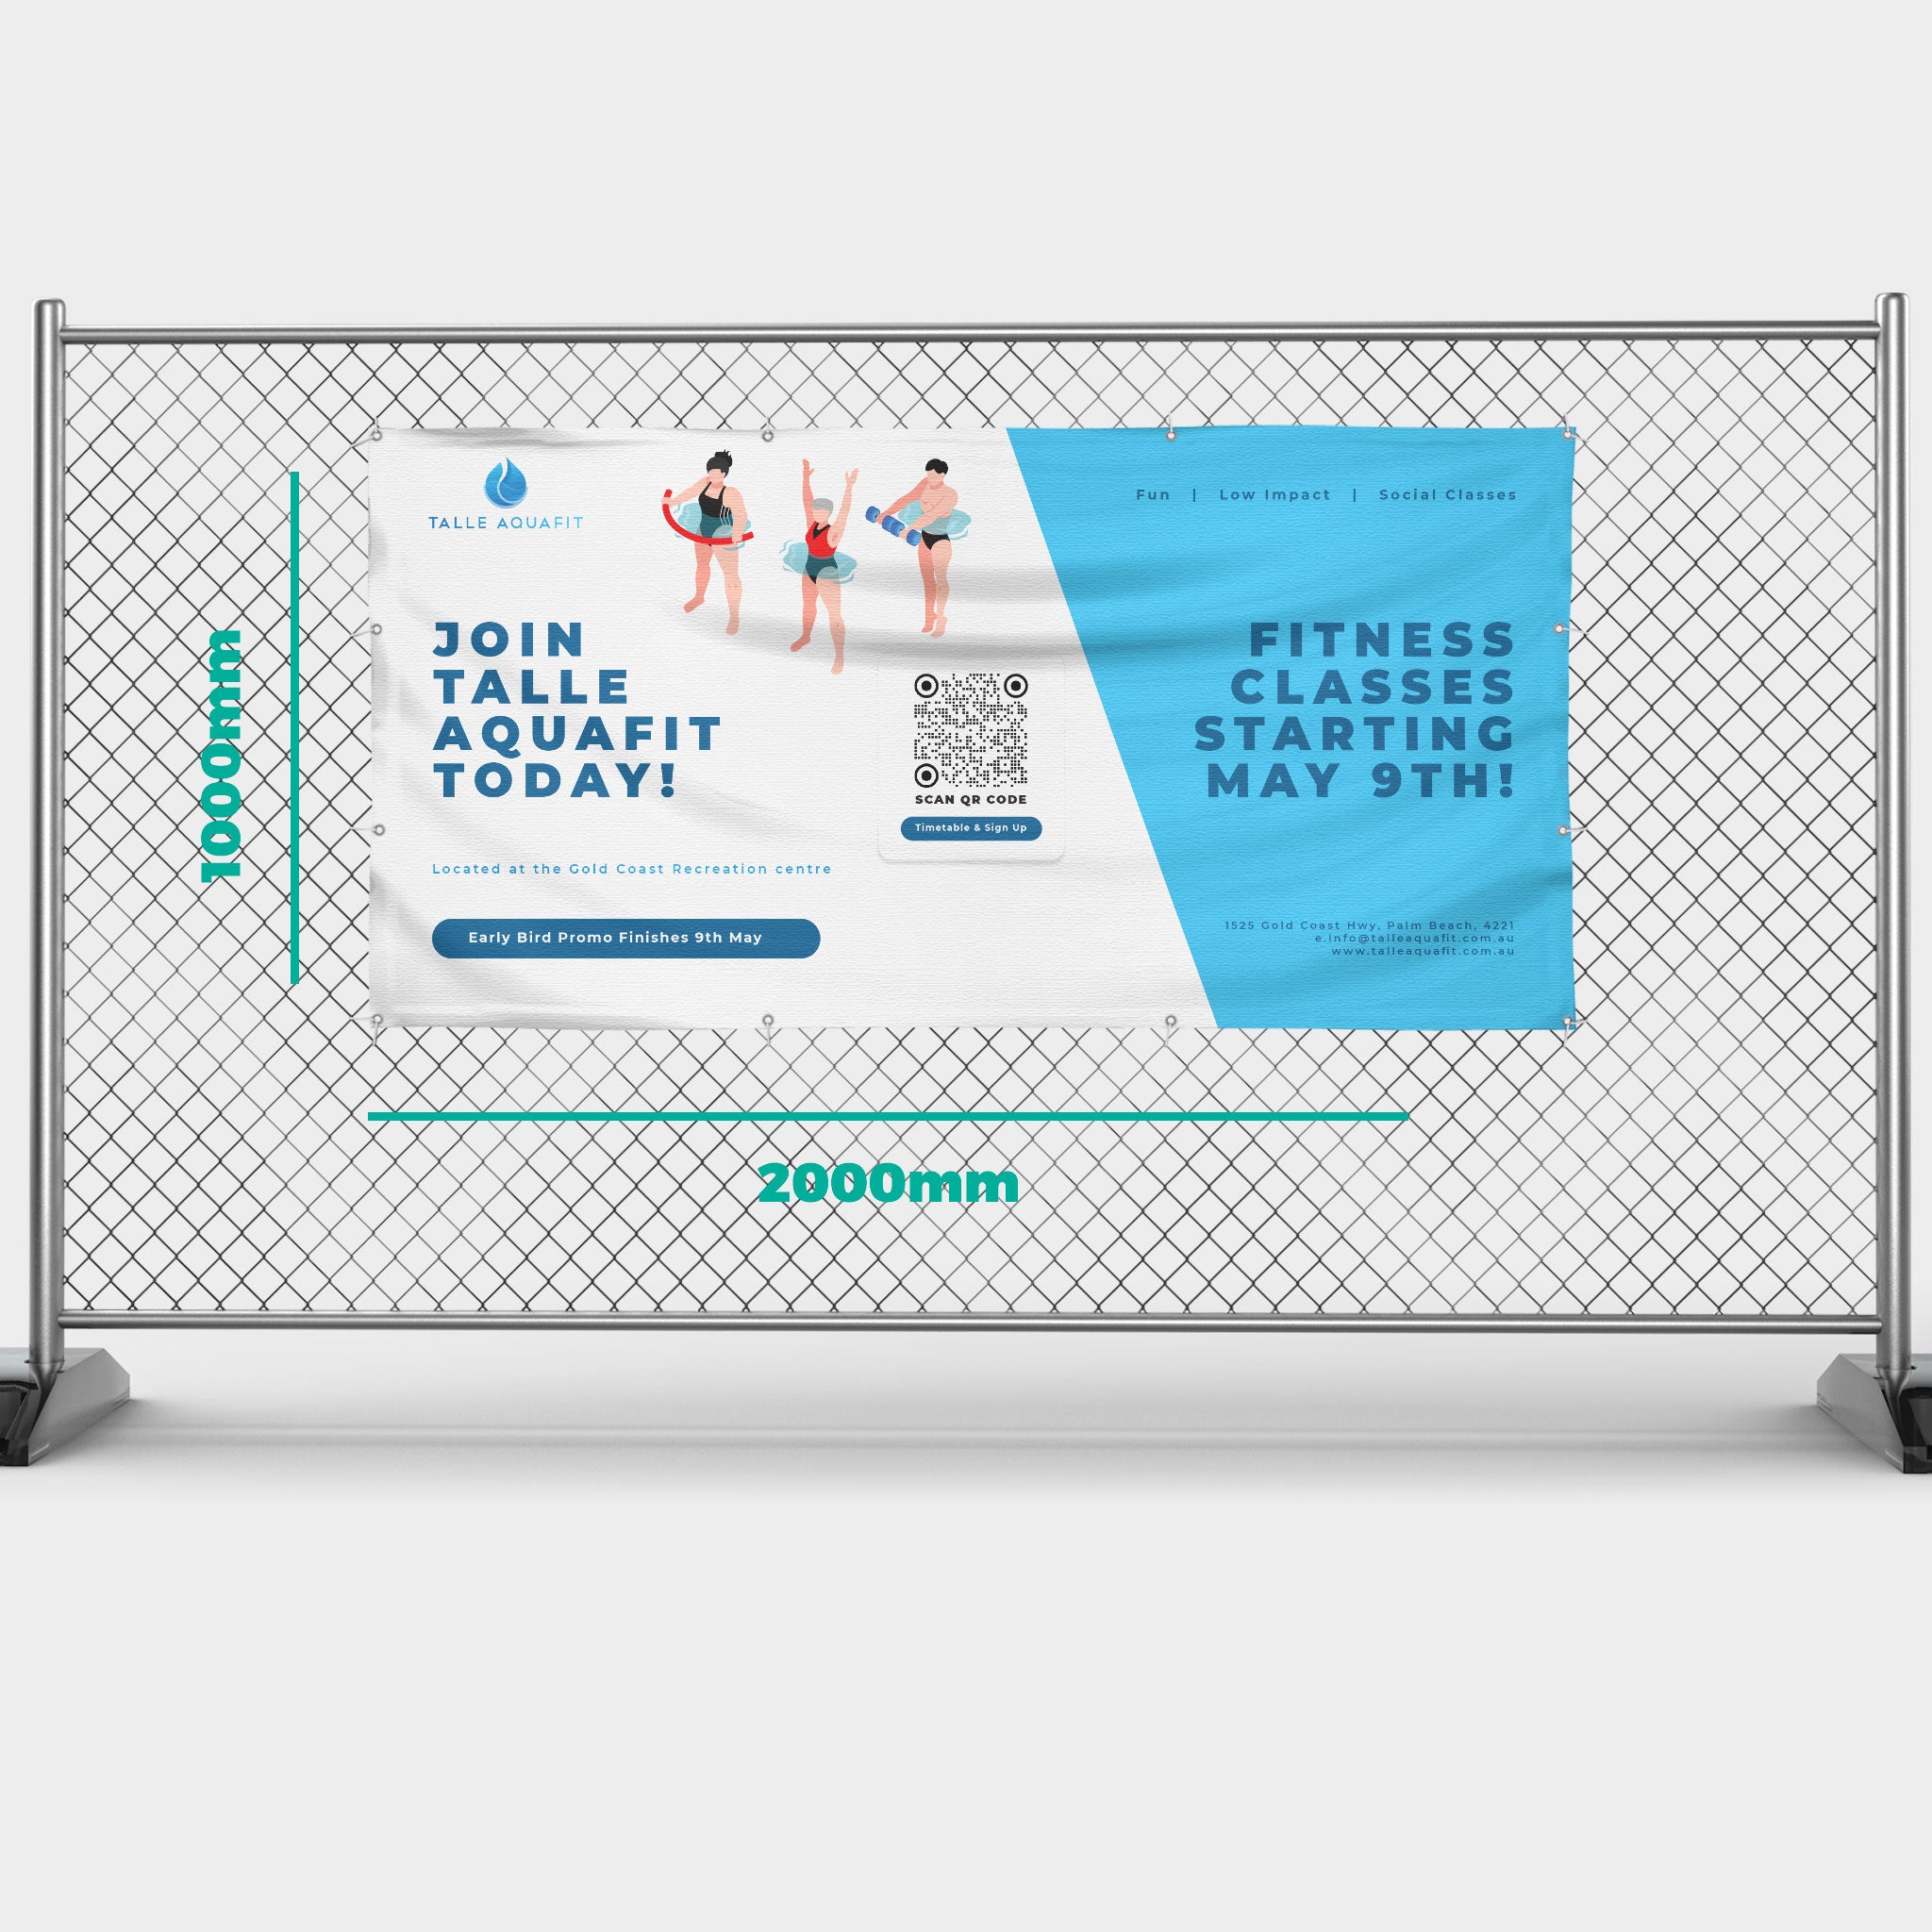 How to Measure the Impact of Your Outdoor Advertising Banners